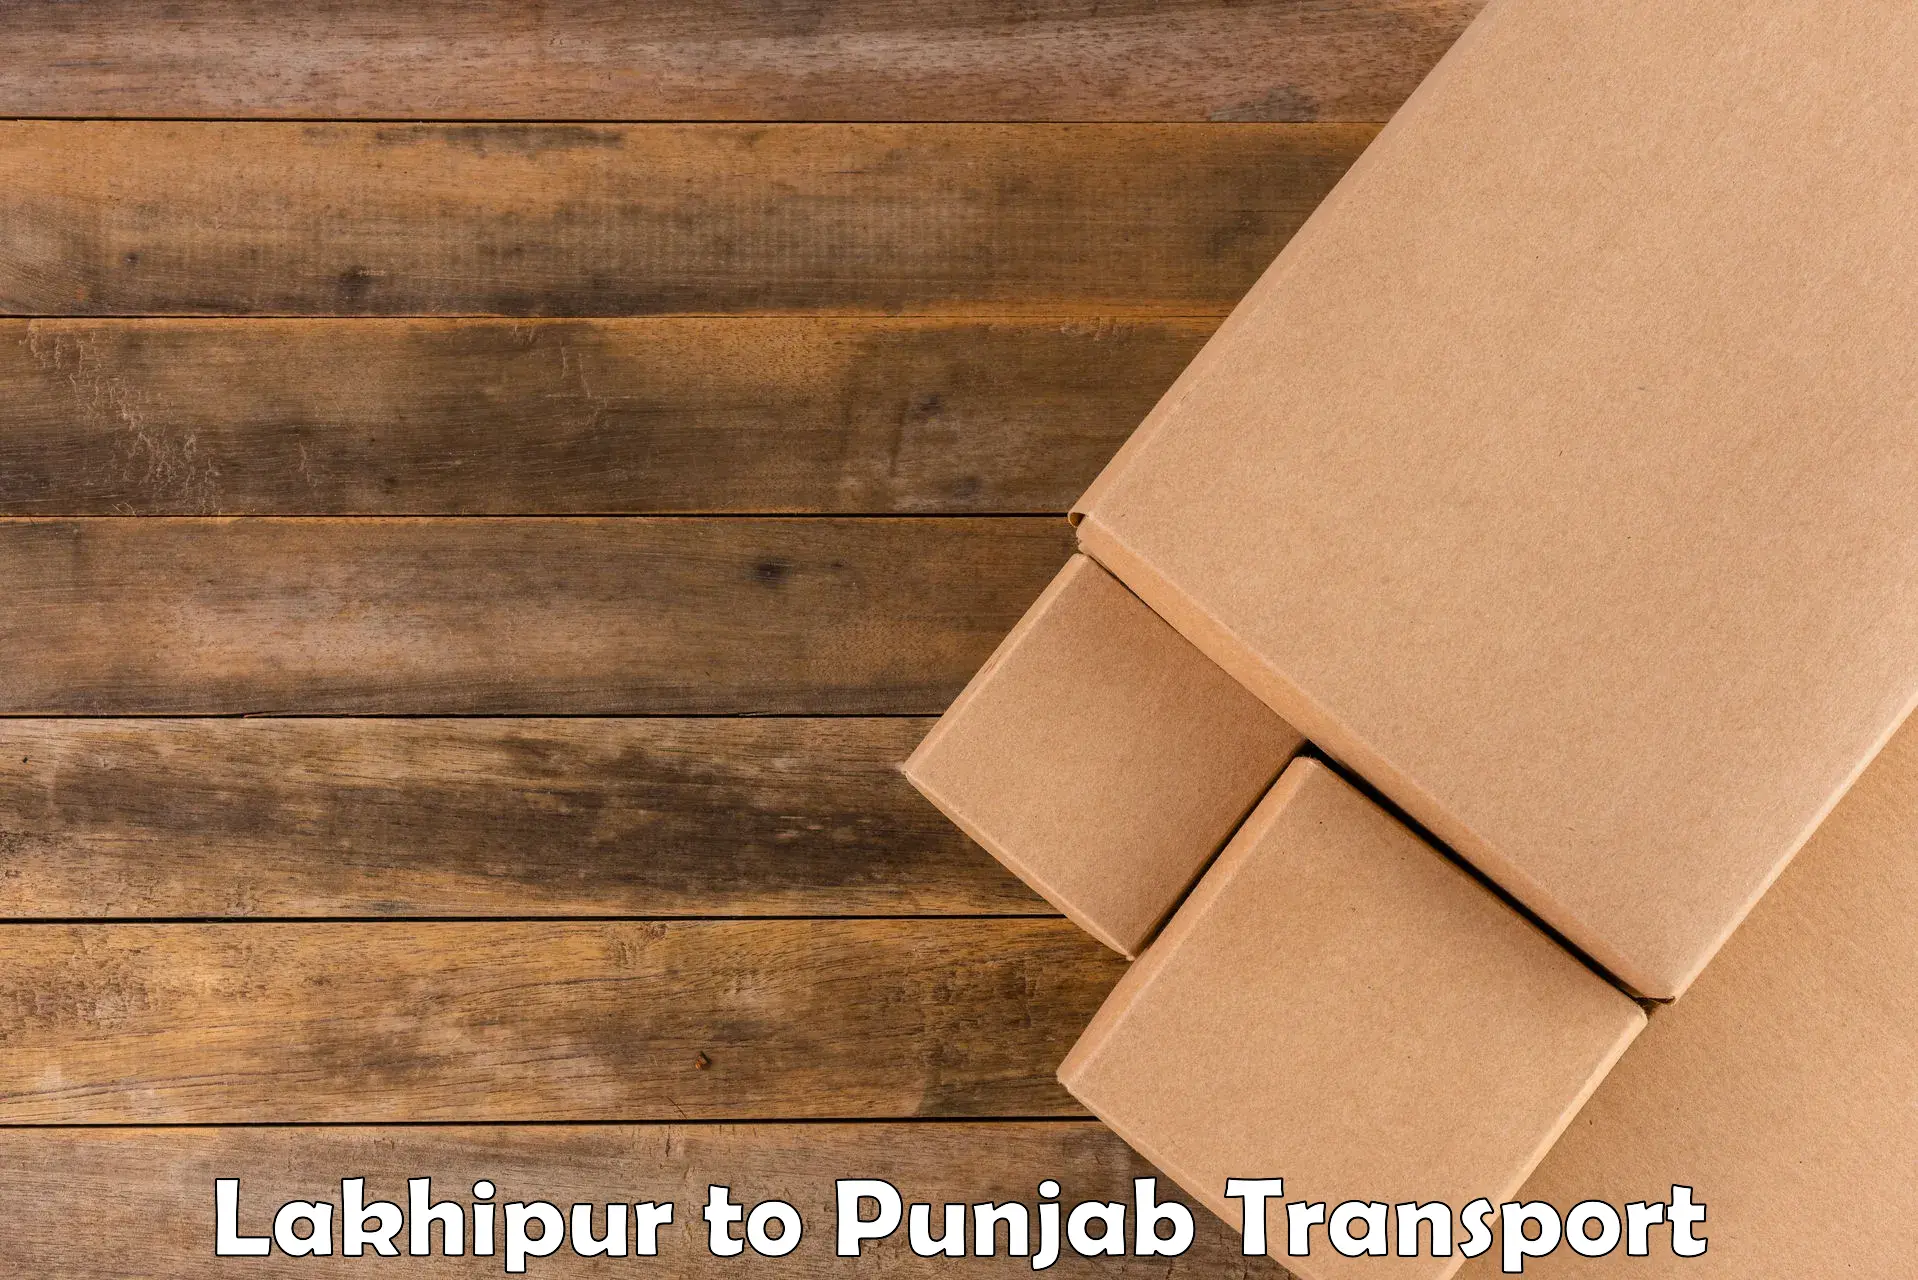 Delivery service Lakhipur to Punjab